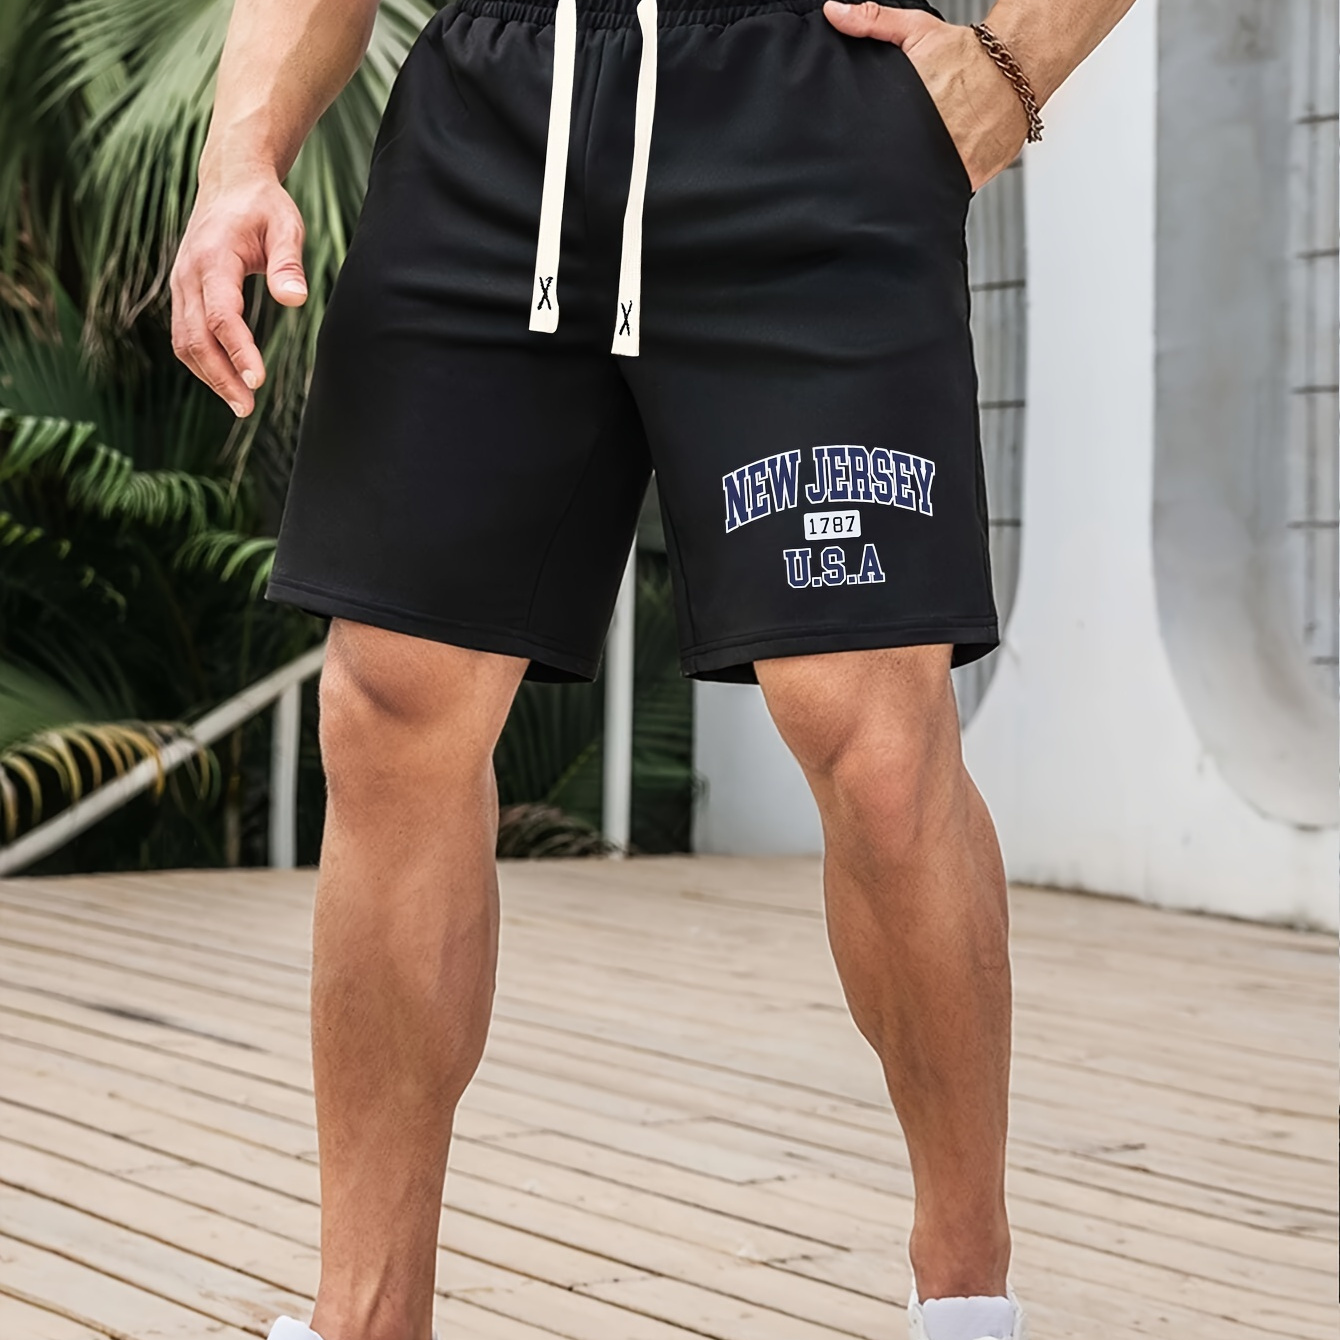 

New Jersey Print, Men's Drawstring Pants, Loose Casual Waist Simple Style Comfy Shorts For Spring Summer Outdoor Fitness Cycling Climbing Mountain Holiday Daily Commute Dates